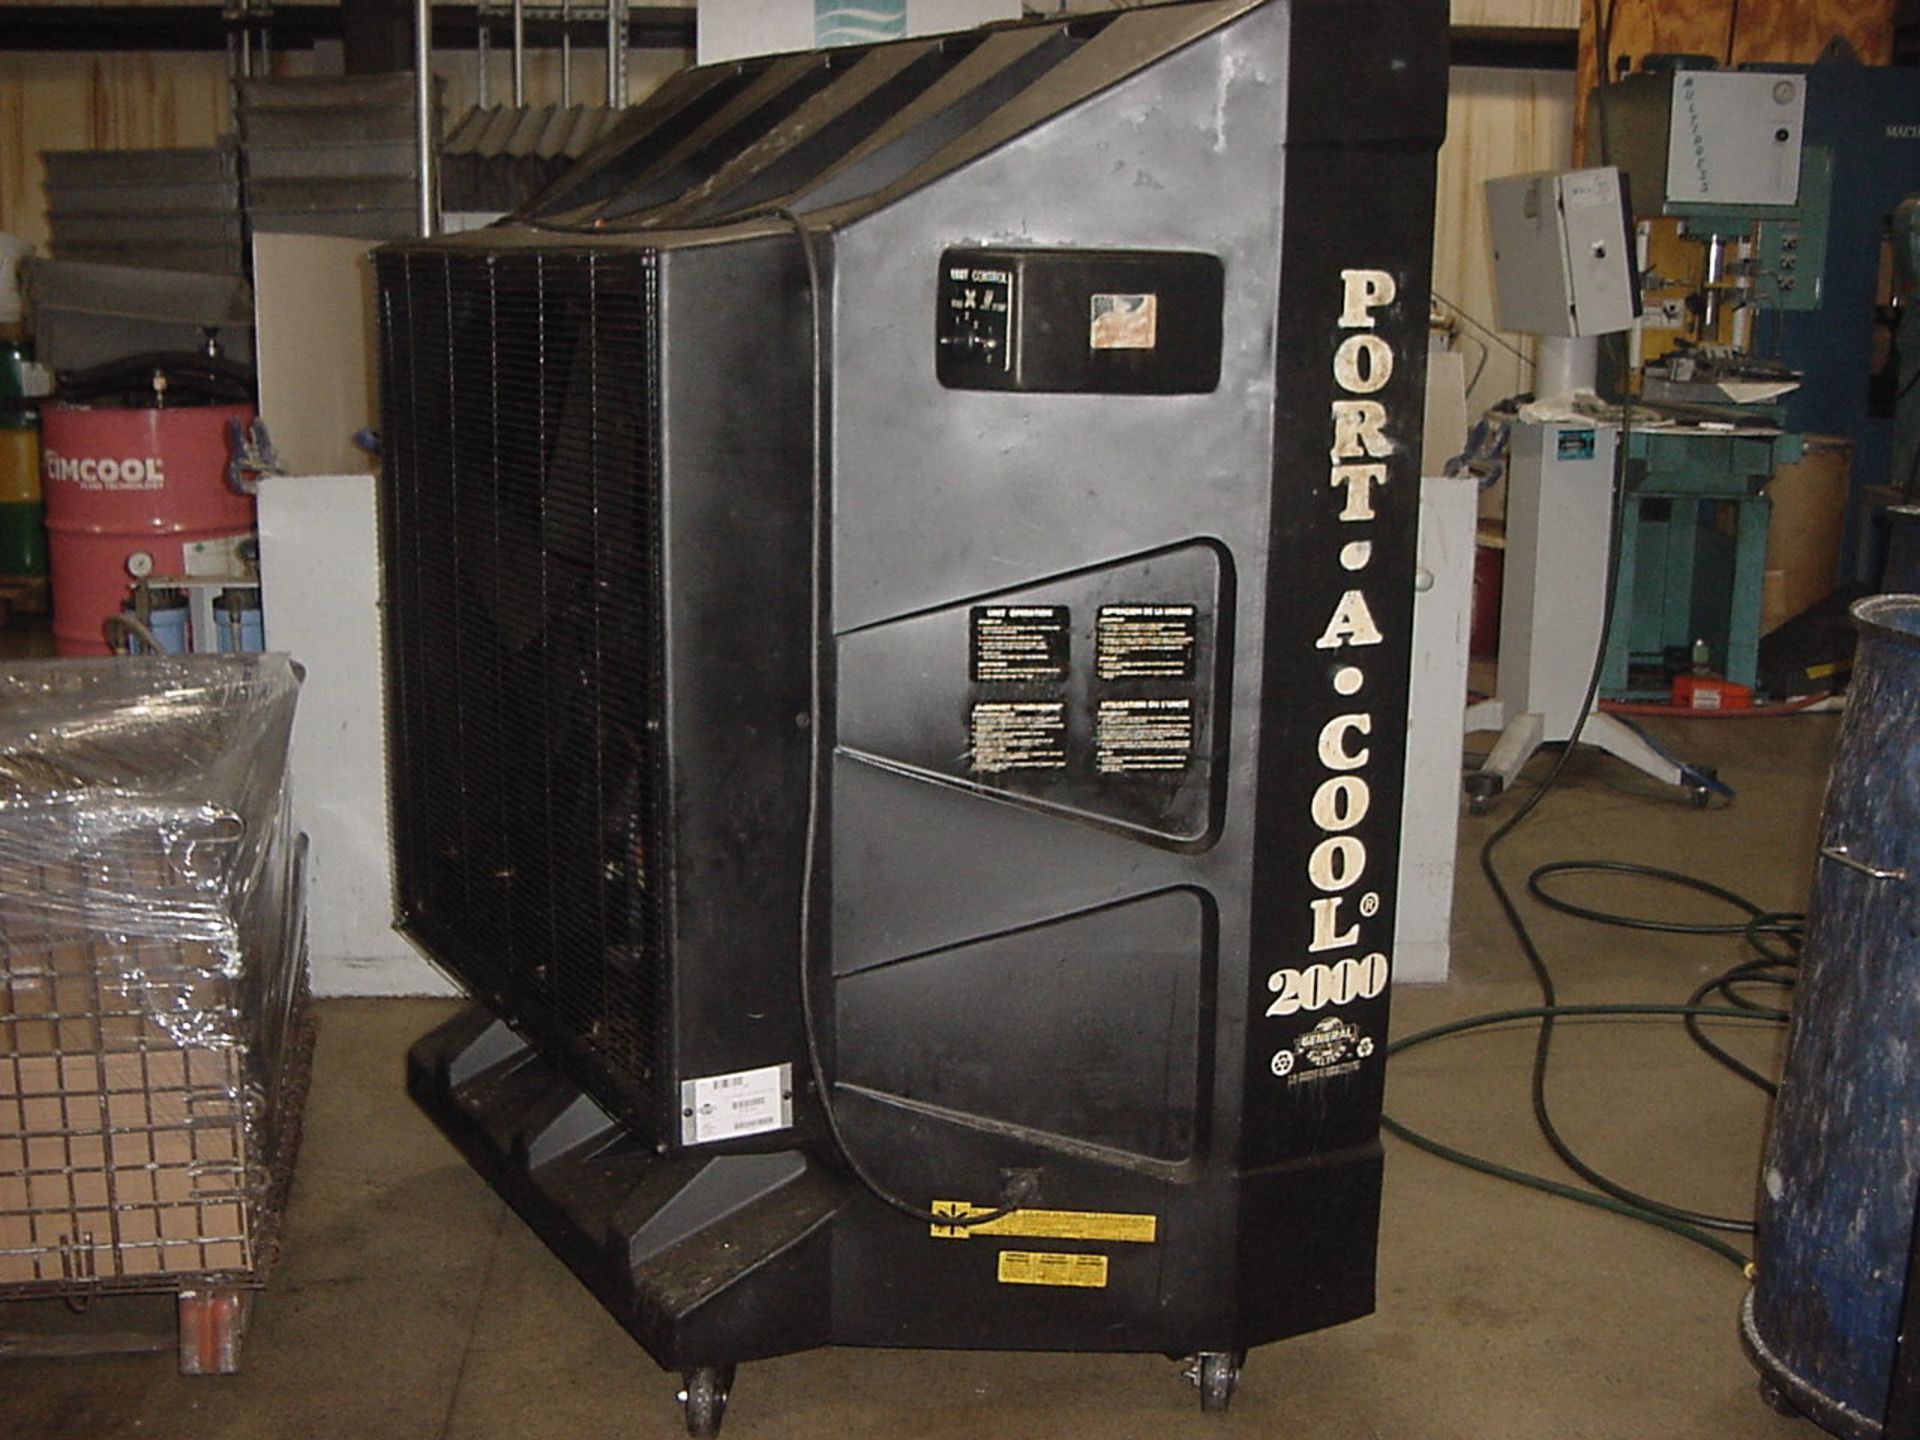 Port A Cool 2000 Evaporative Cooler (LOCATED IN CORRY, PA) - Image 3 of 4